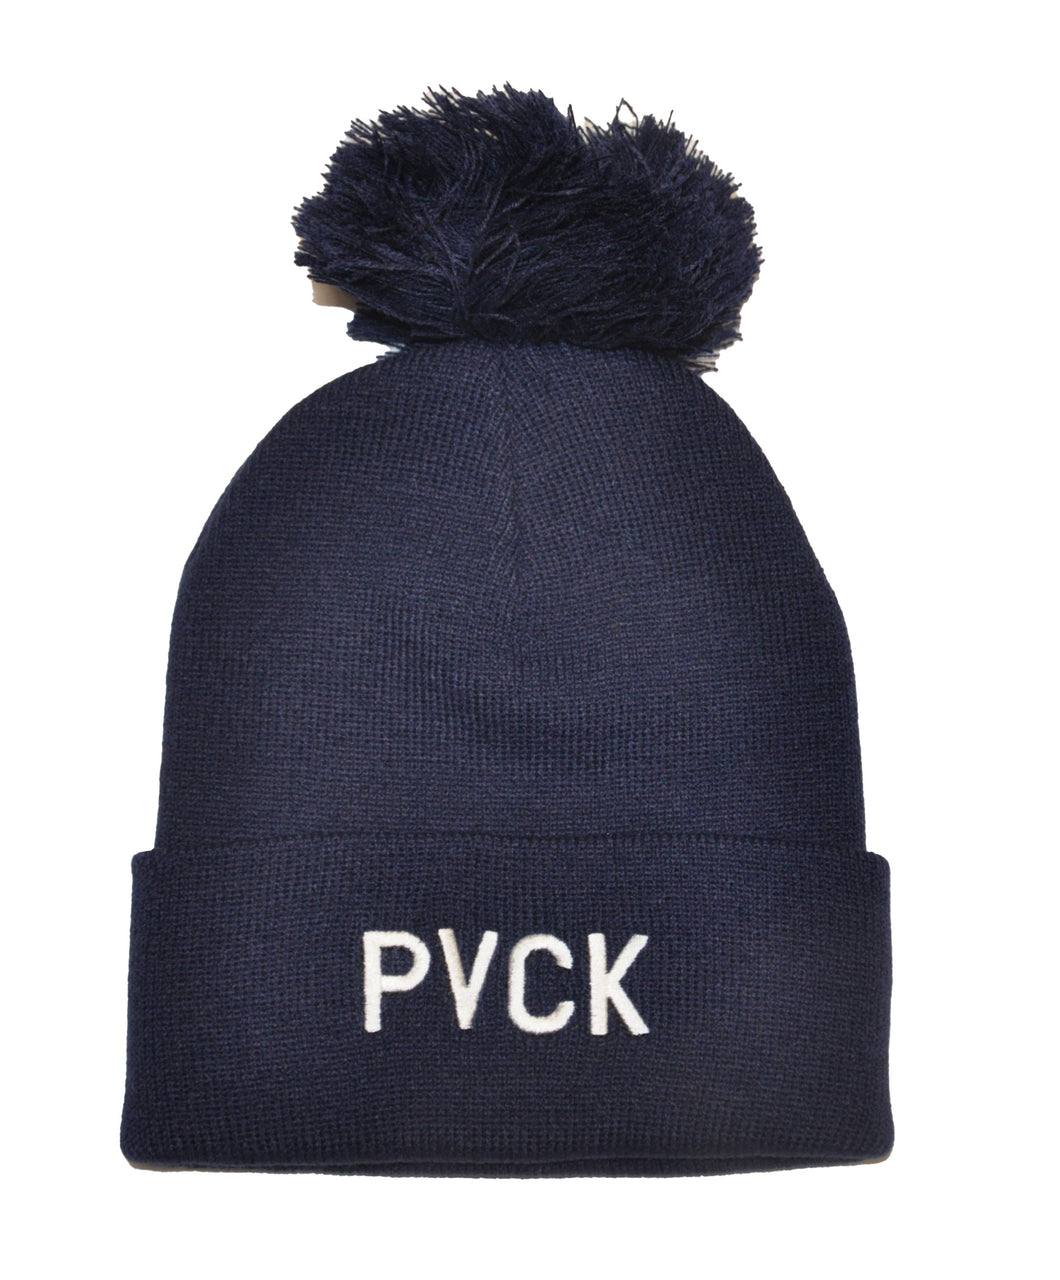 PVCK Cuff Knit with Pom